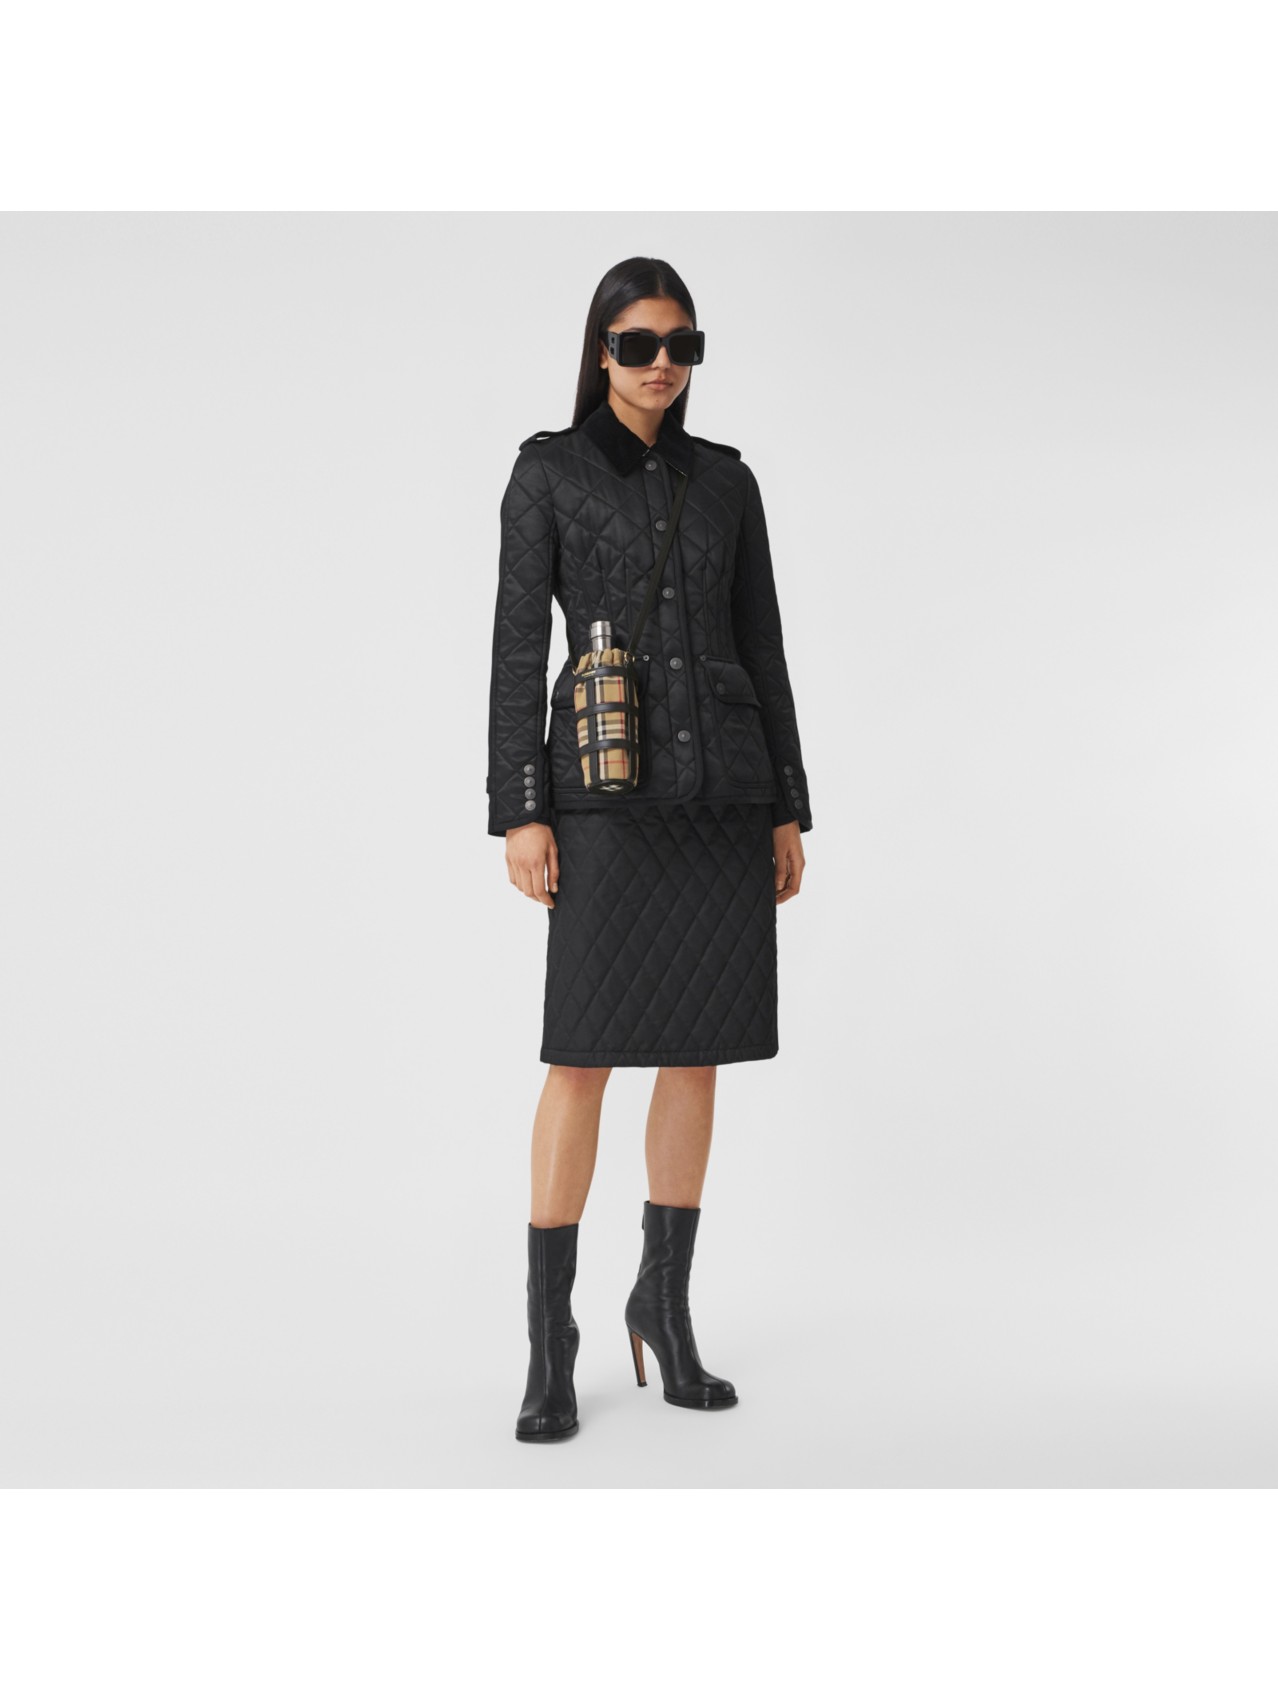 Accessories for Women | Burberry United Kingdom